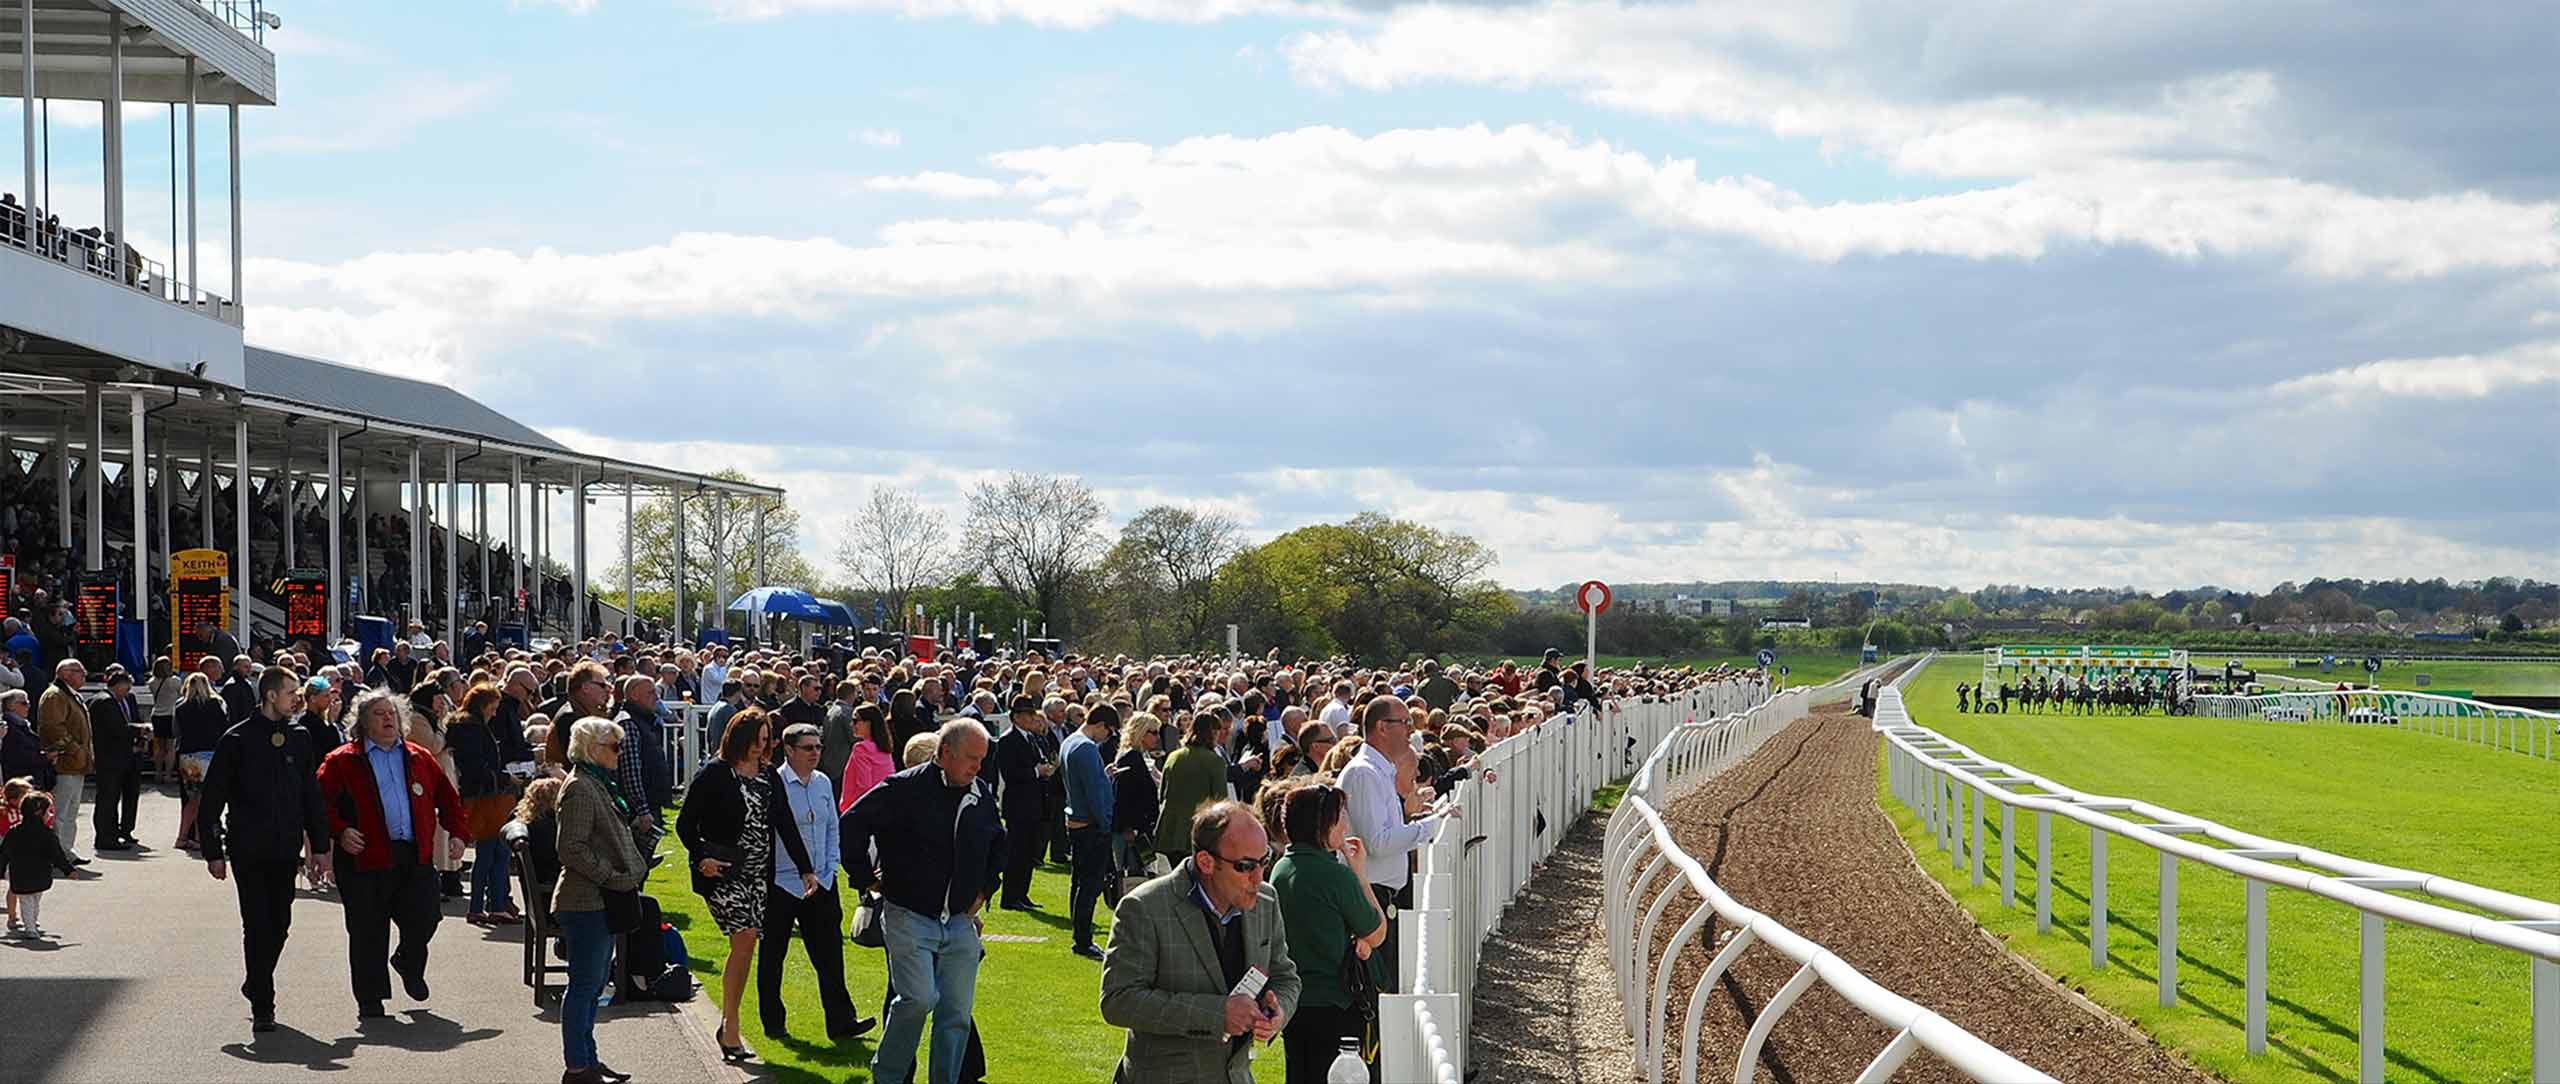 Welcome to Wetherby Racecourse | Wetherby Racecourse